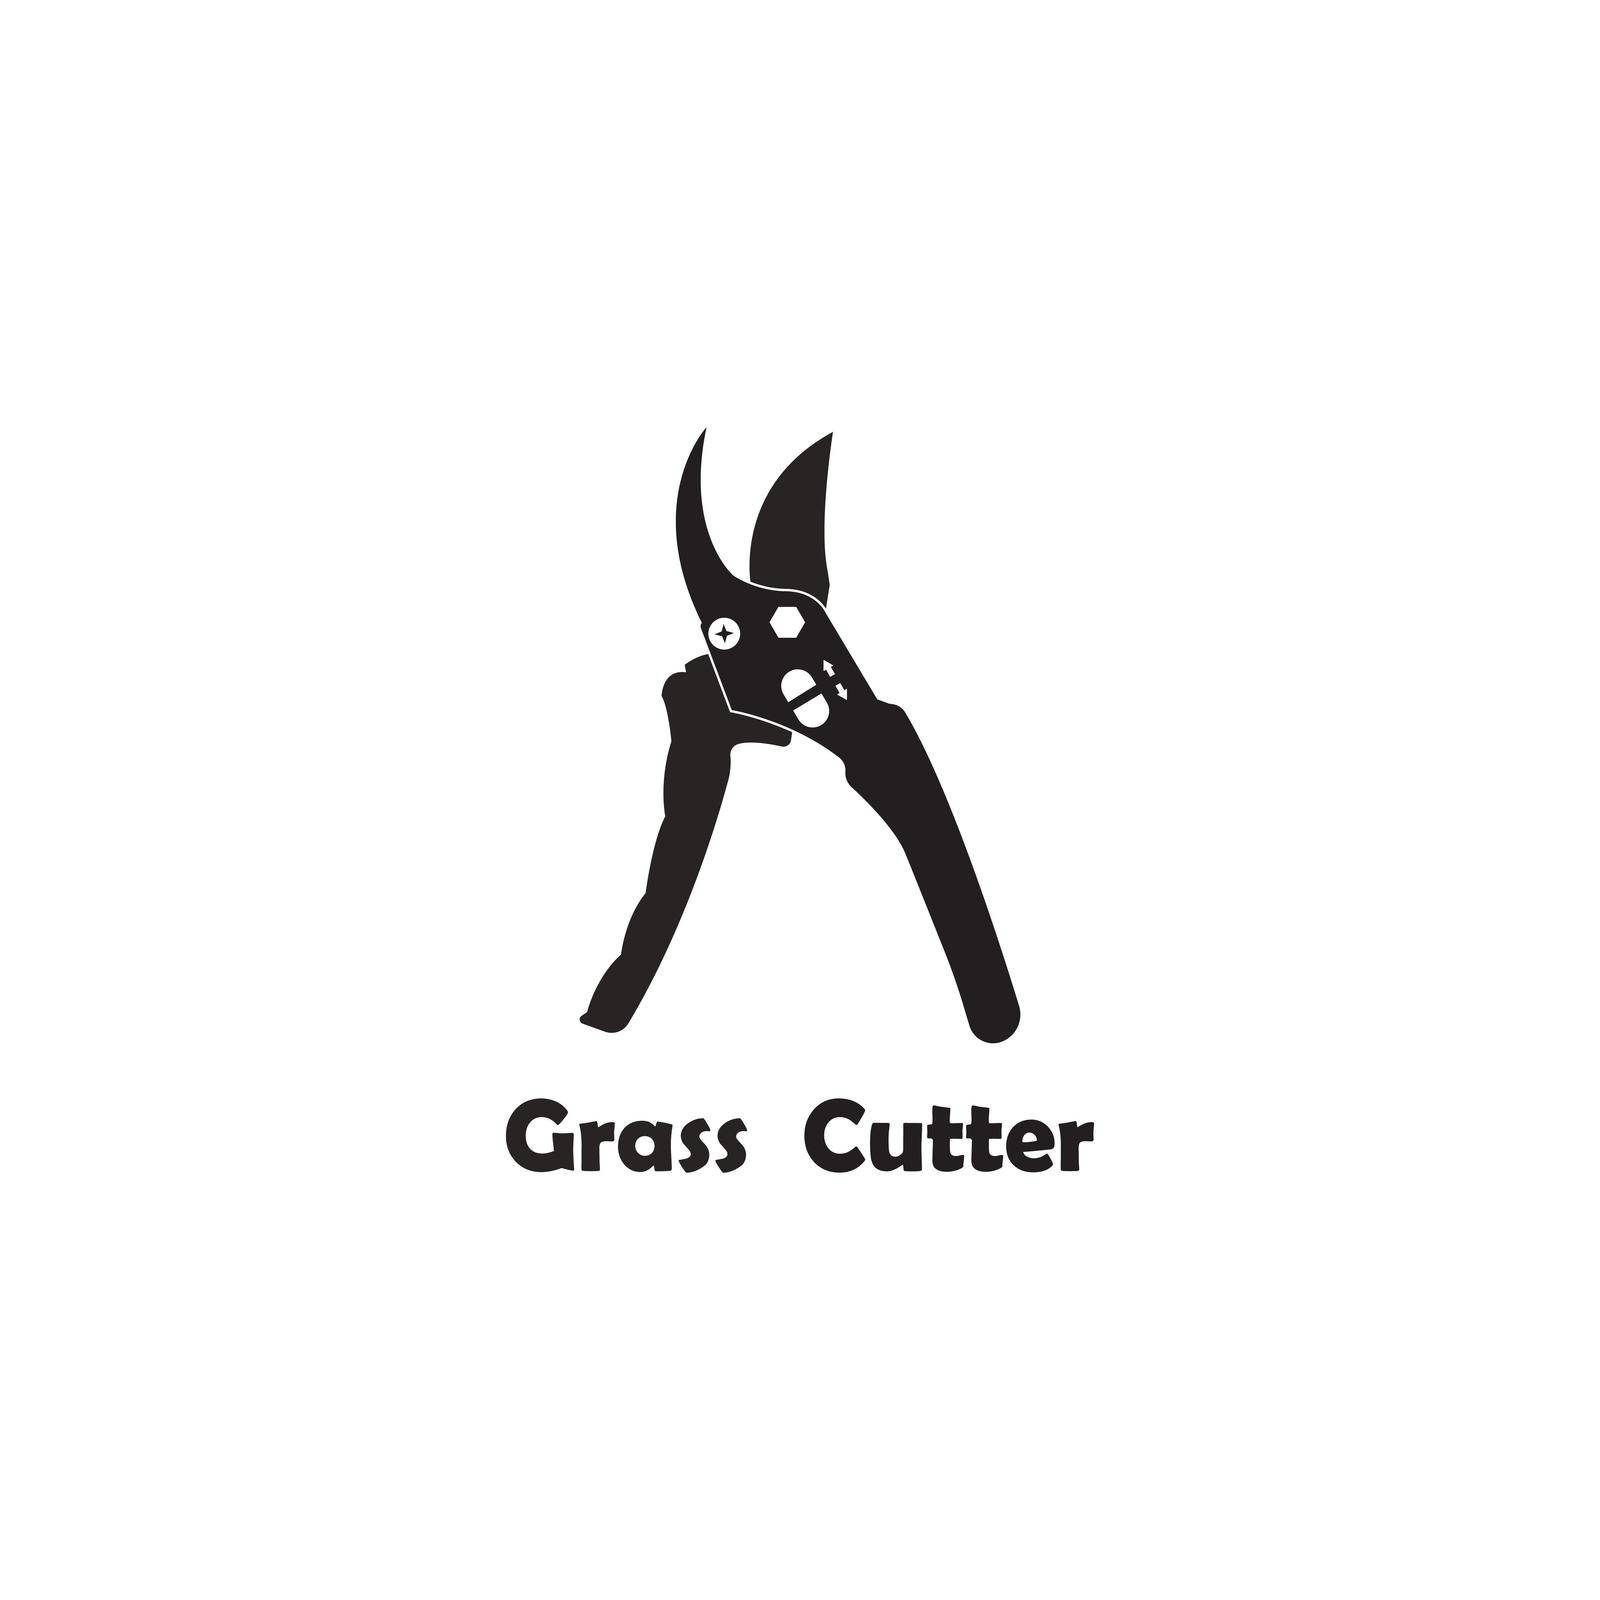 Grass cutter icon by rnking